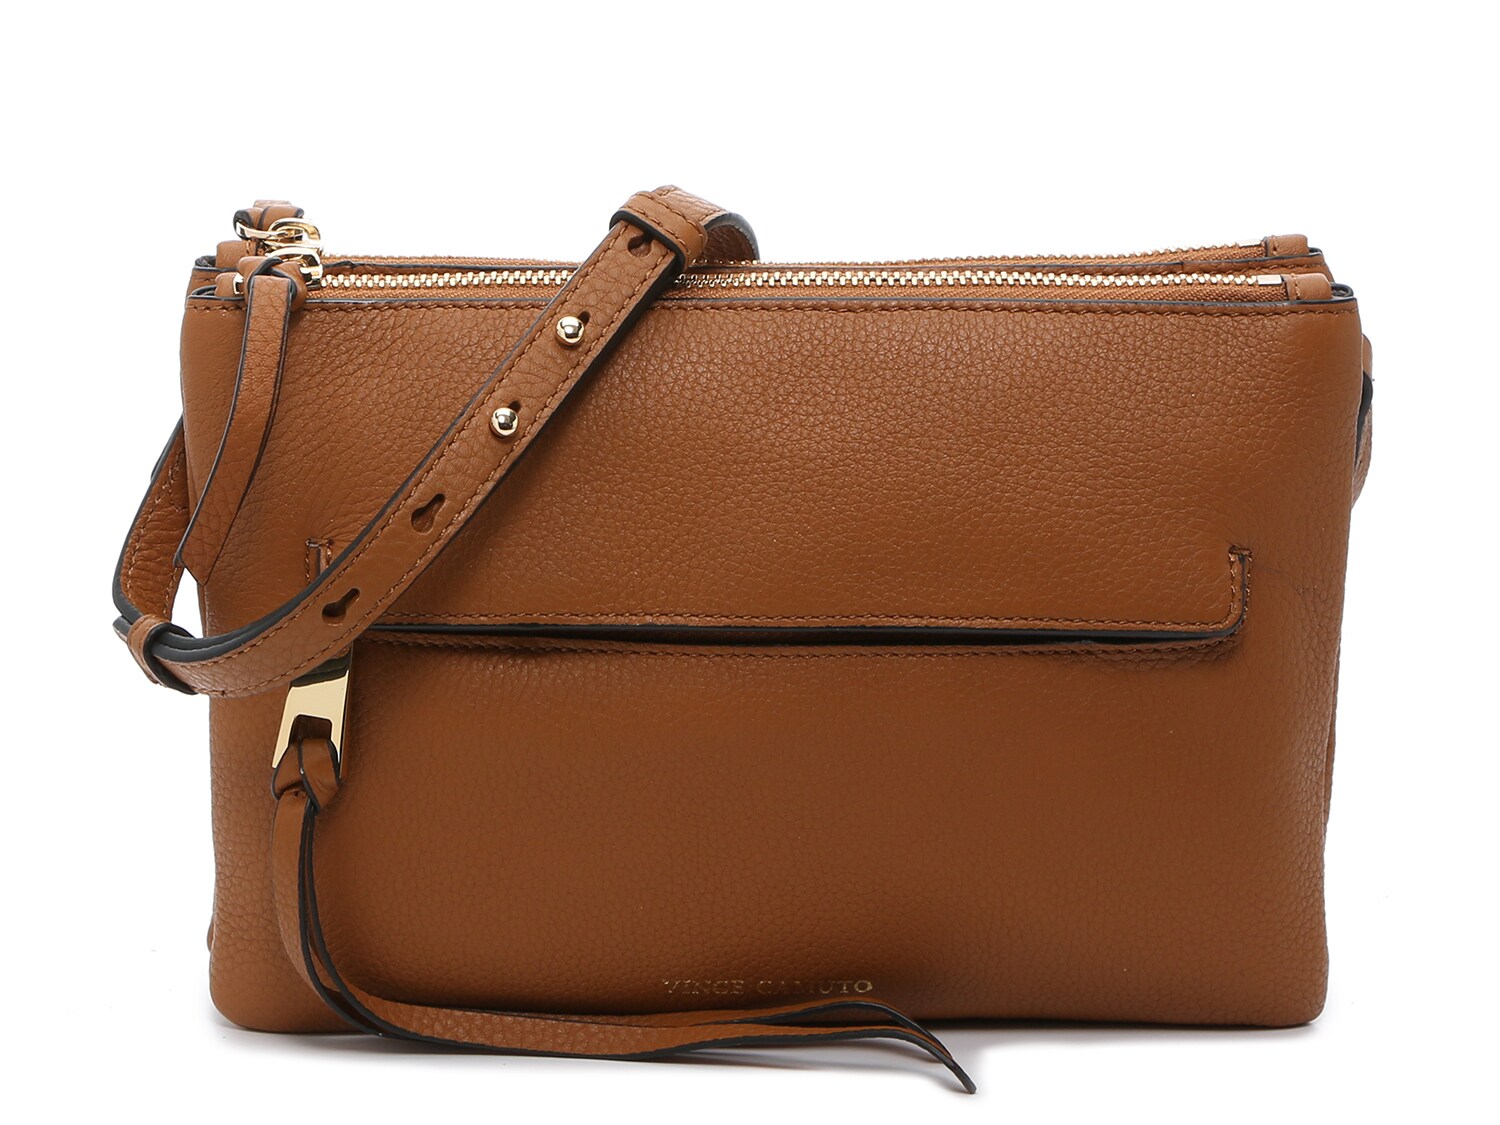 Vince Camuto Gally Leather Crossbody Bag | DSW